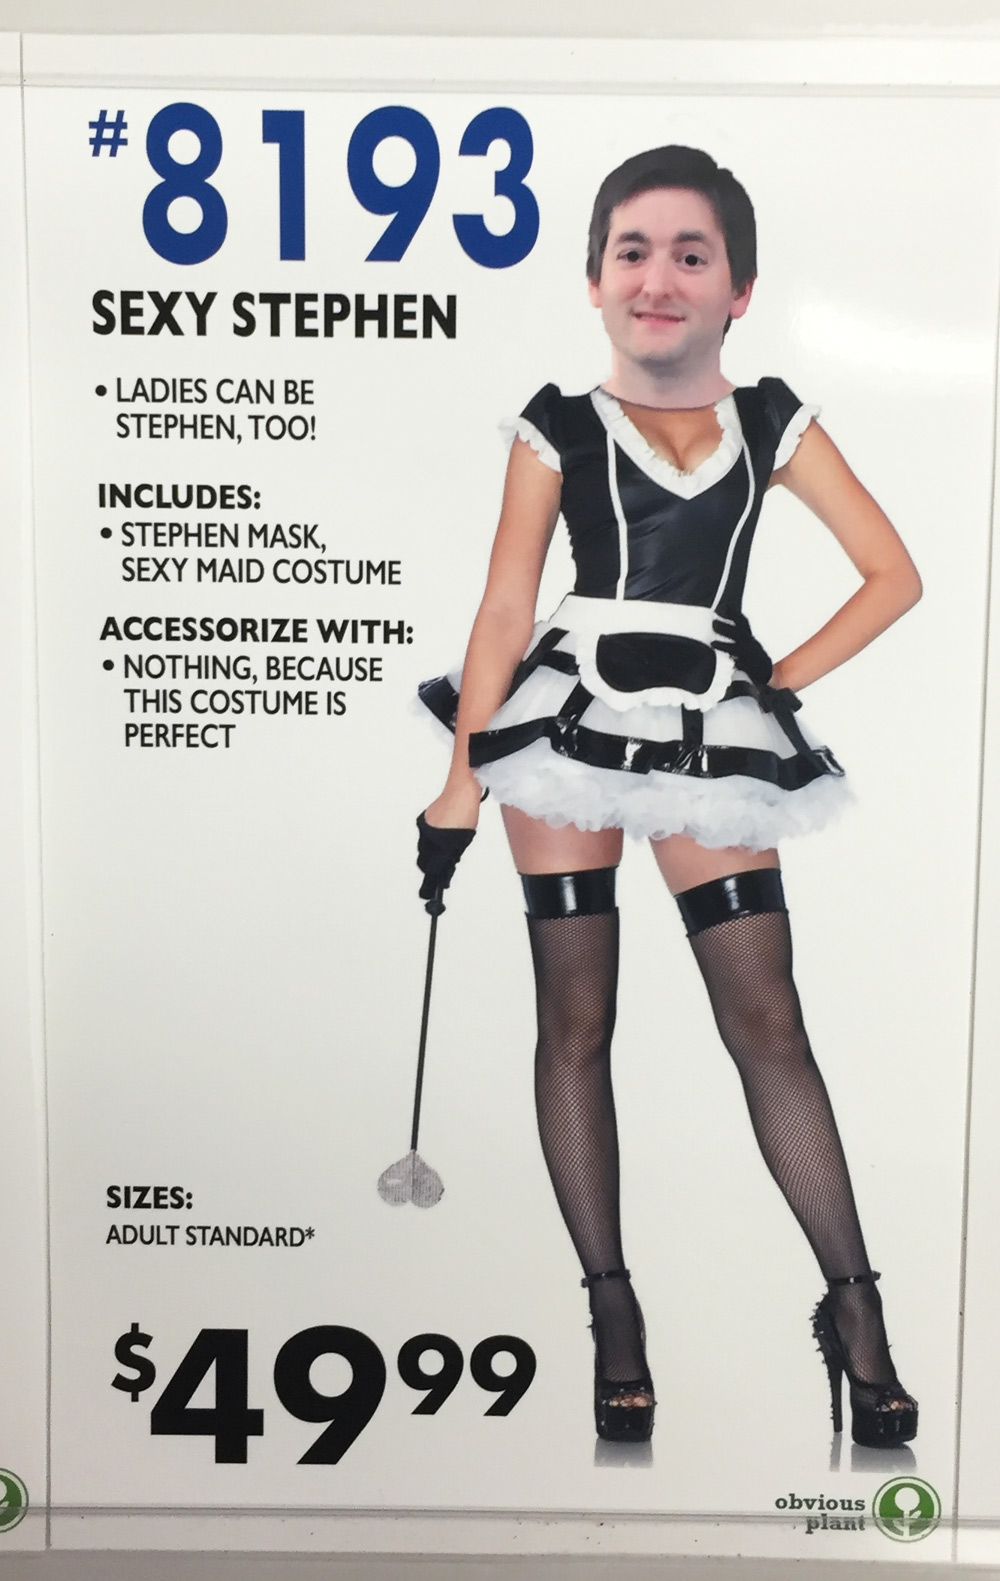 fake halloween costumes - Sexy Stephen Ladies Can Be Stephen, Too! Includes Stephen Mask, Sexy Maid Costume Accessorize With Nothing, Because This Costume Is Perfect Sizes Adult Standard $4999 obvious plant